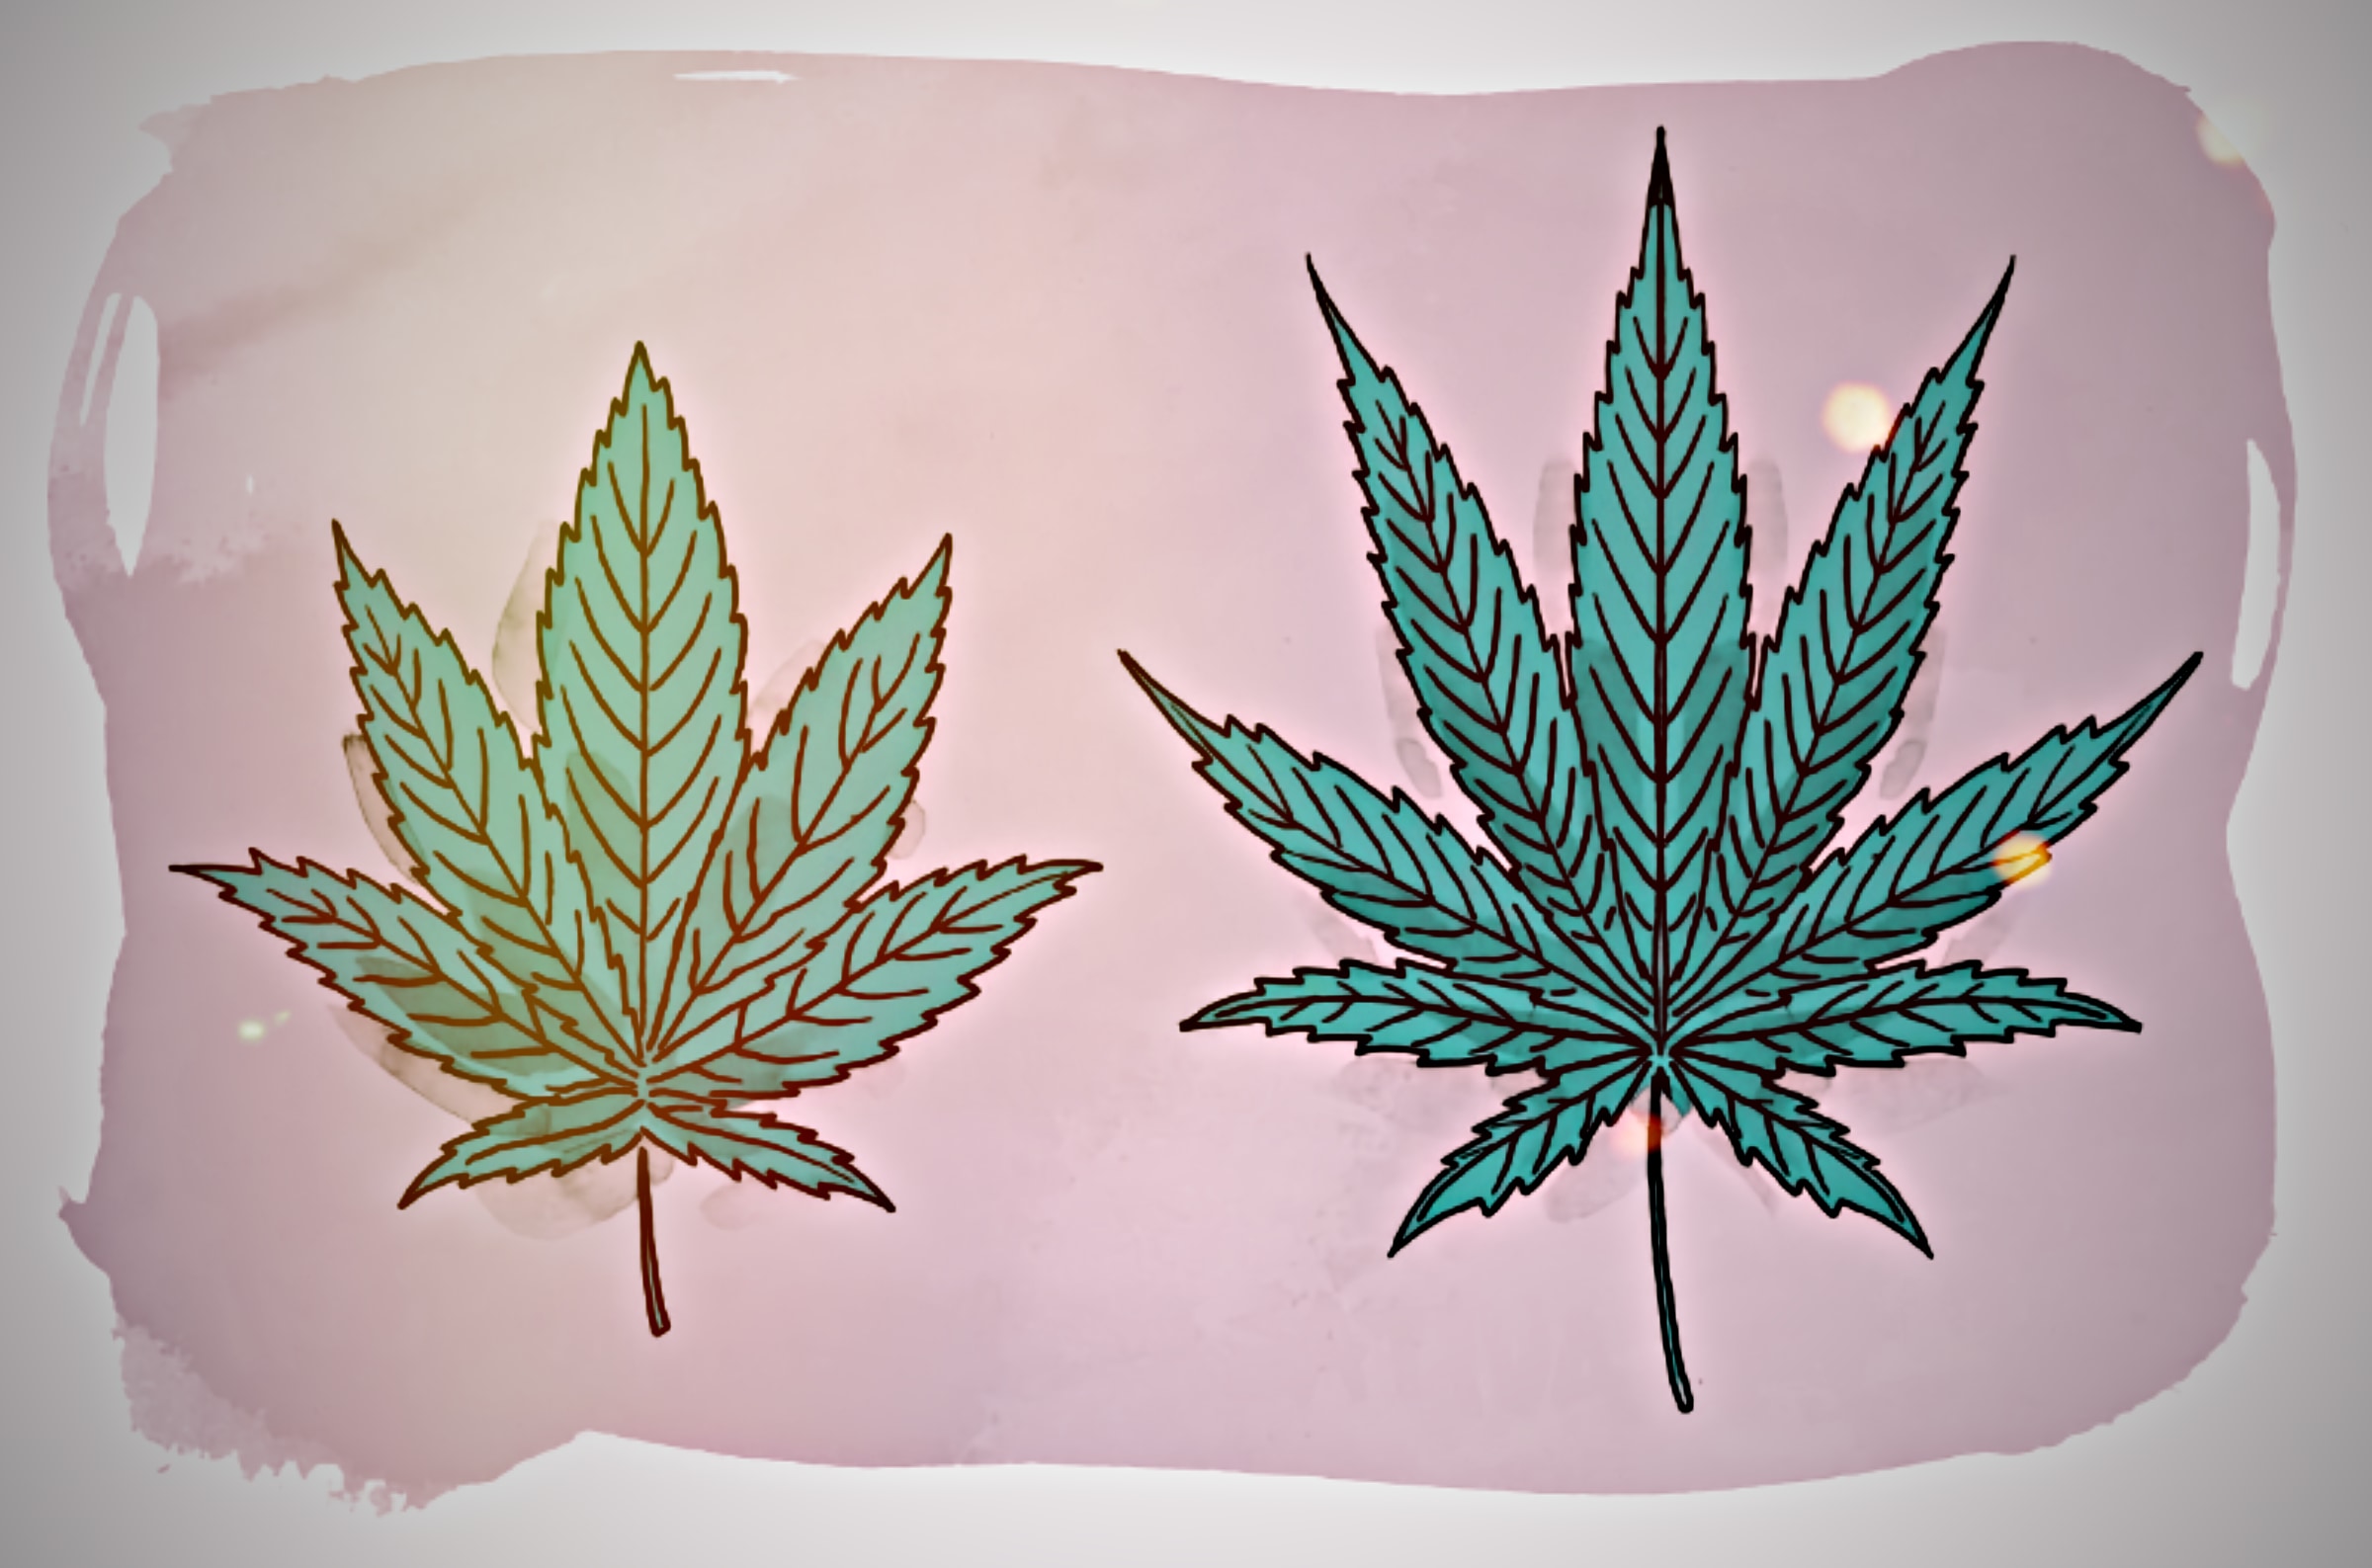 Indica vs. Sativa: Is there really a difference?